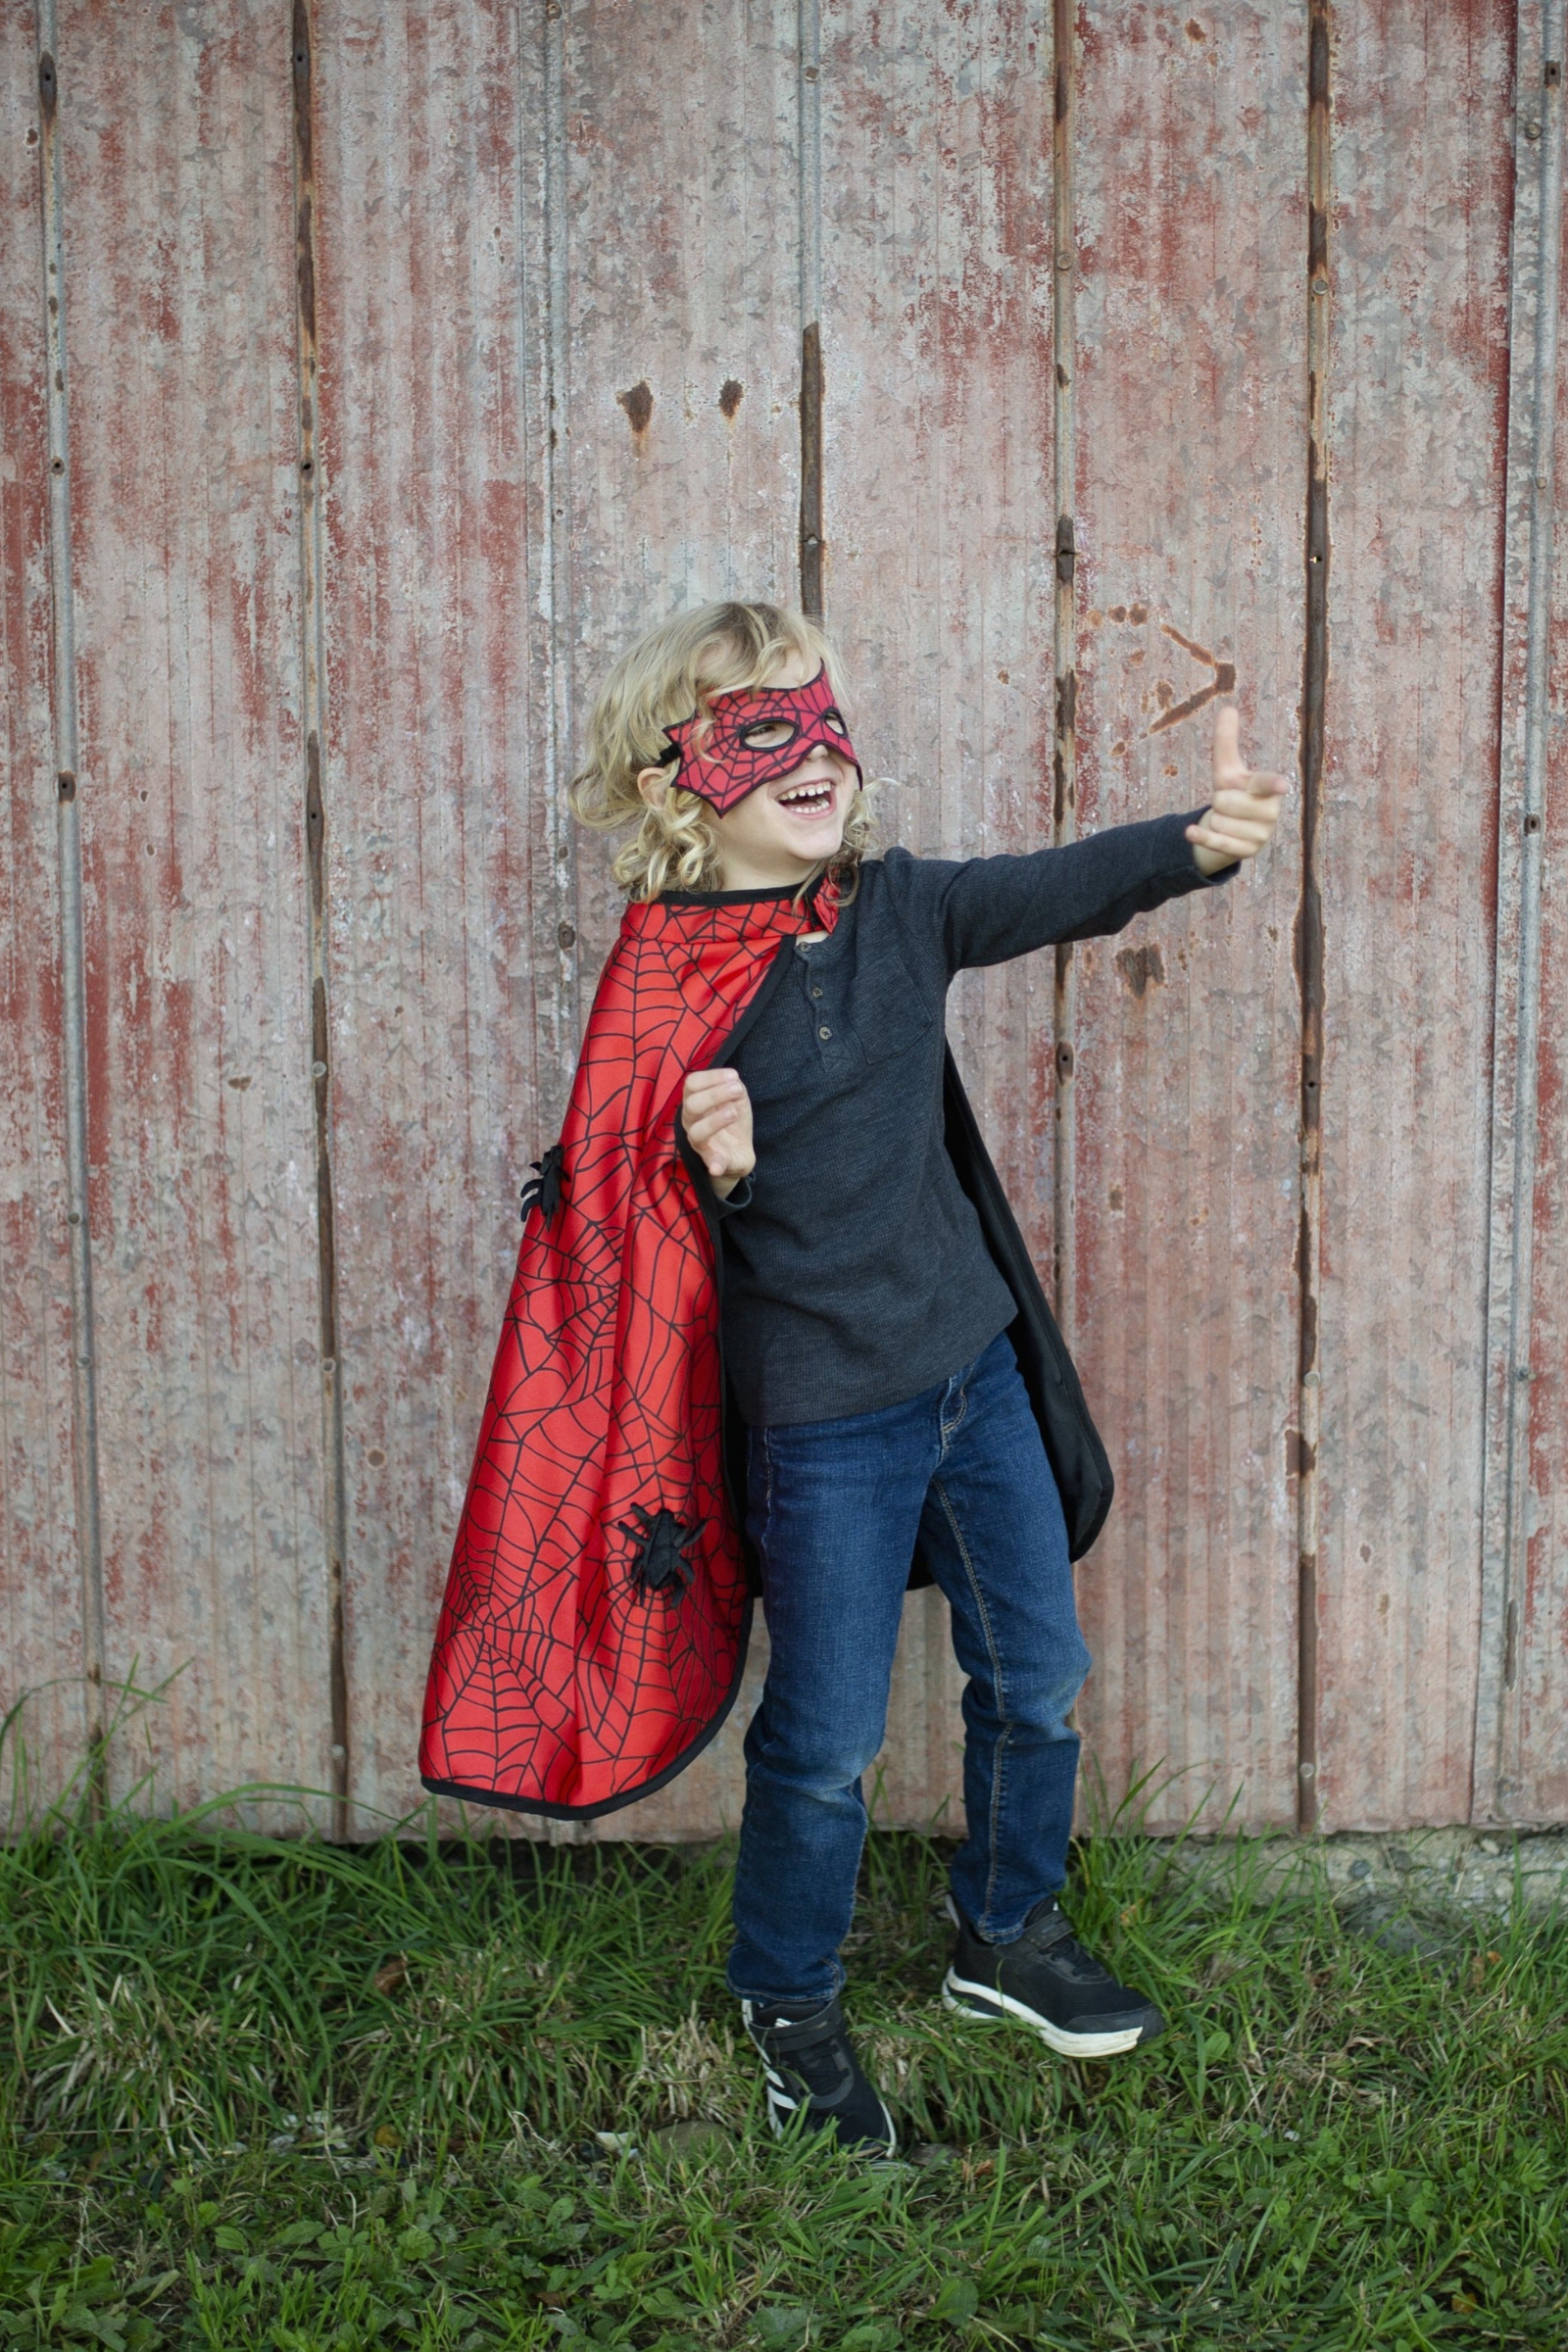 Reversible Spider Bat Cape and Mask